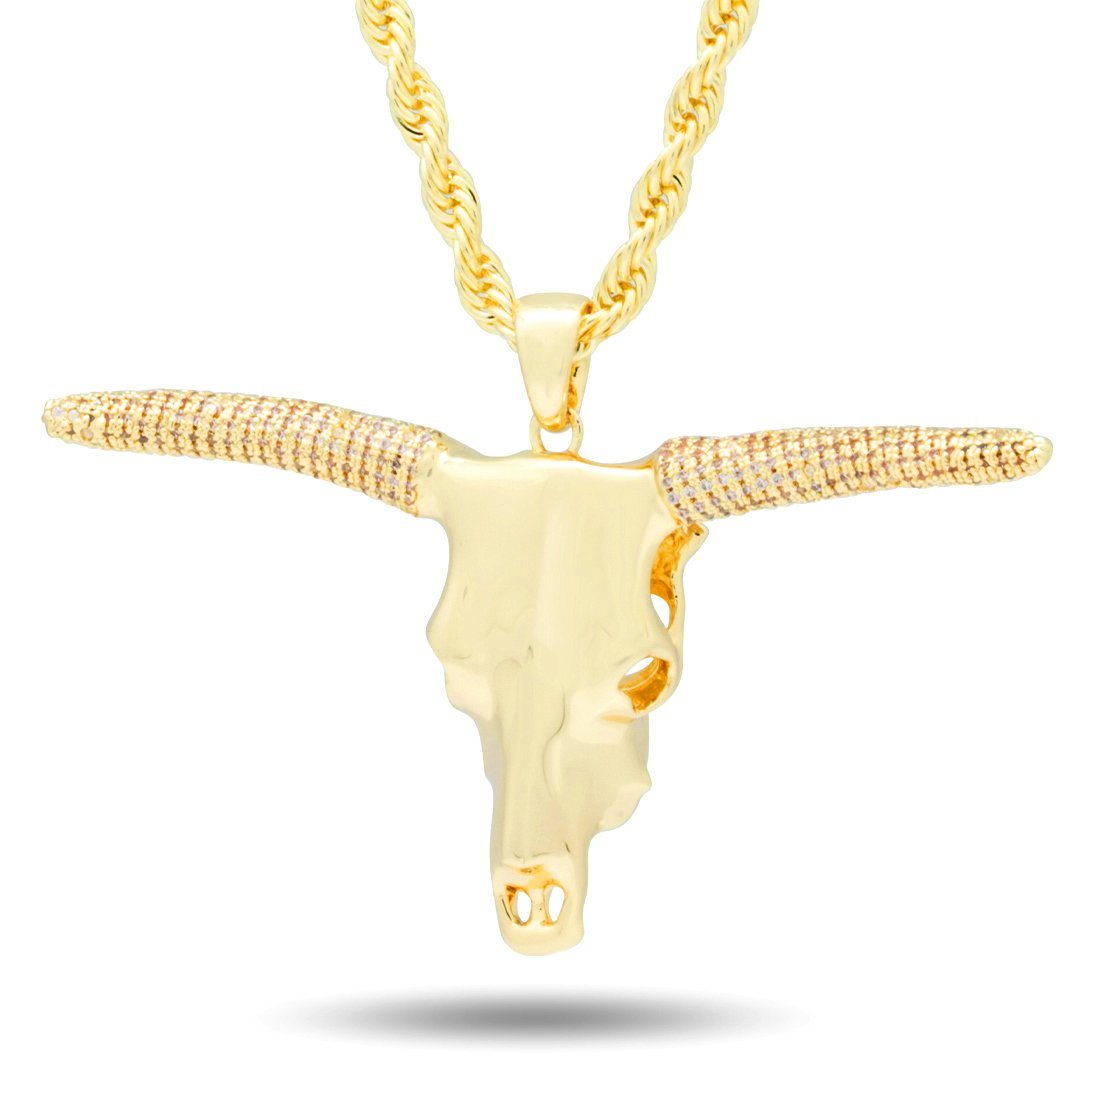 The Longhorn Necklace